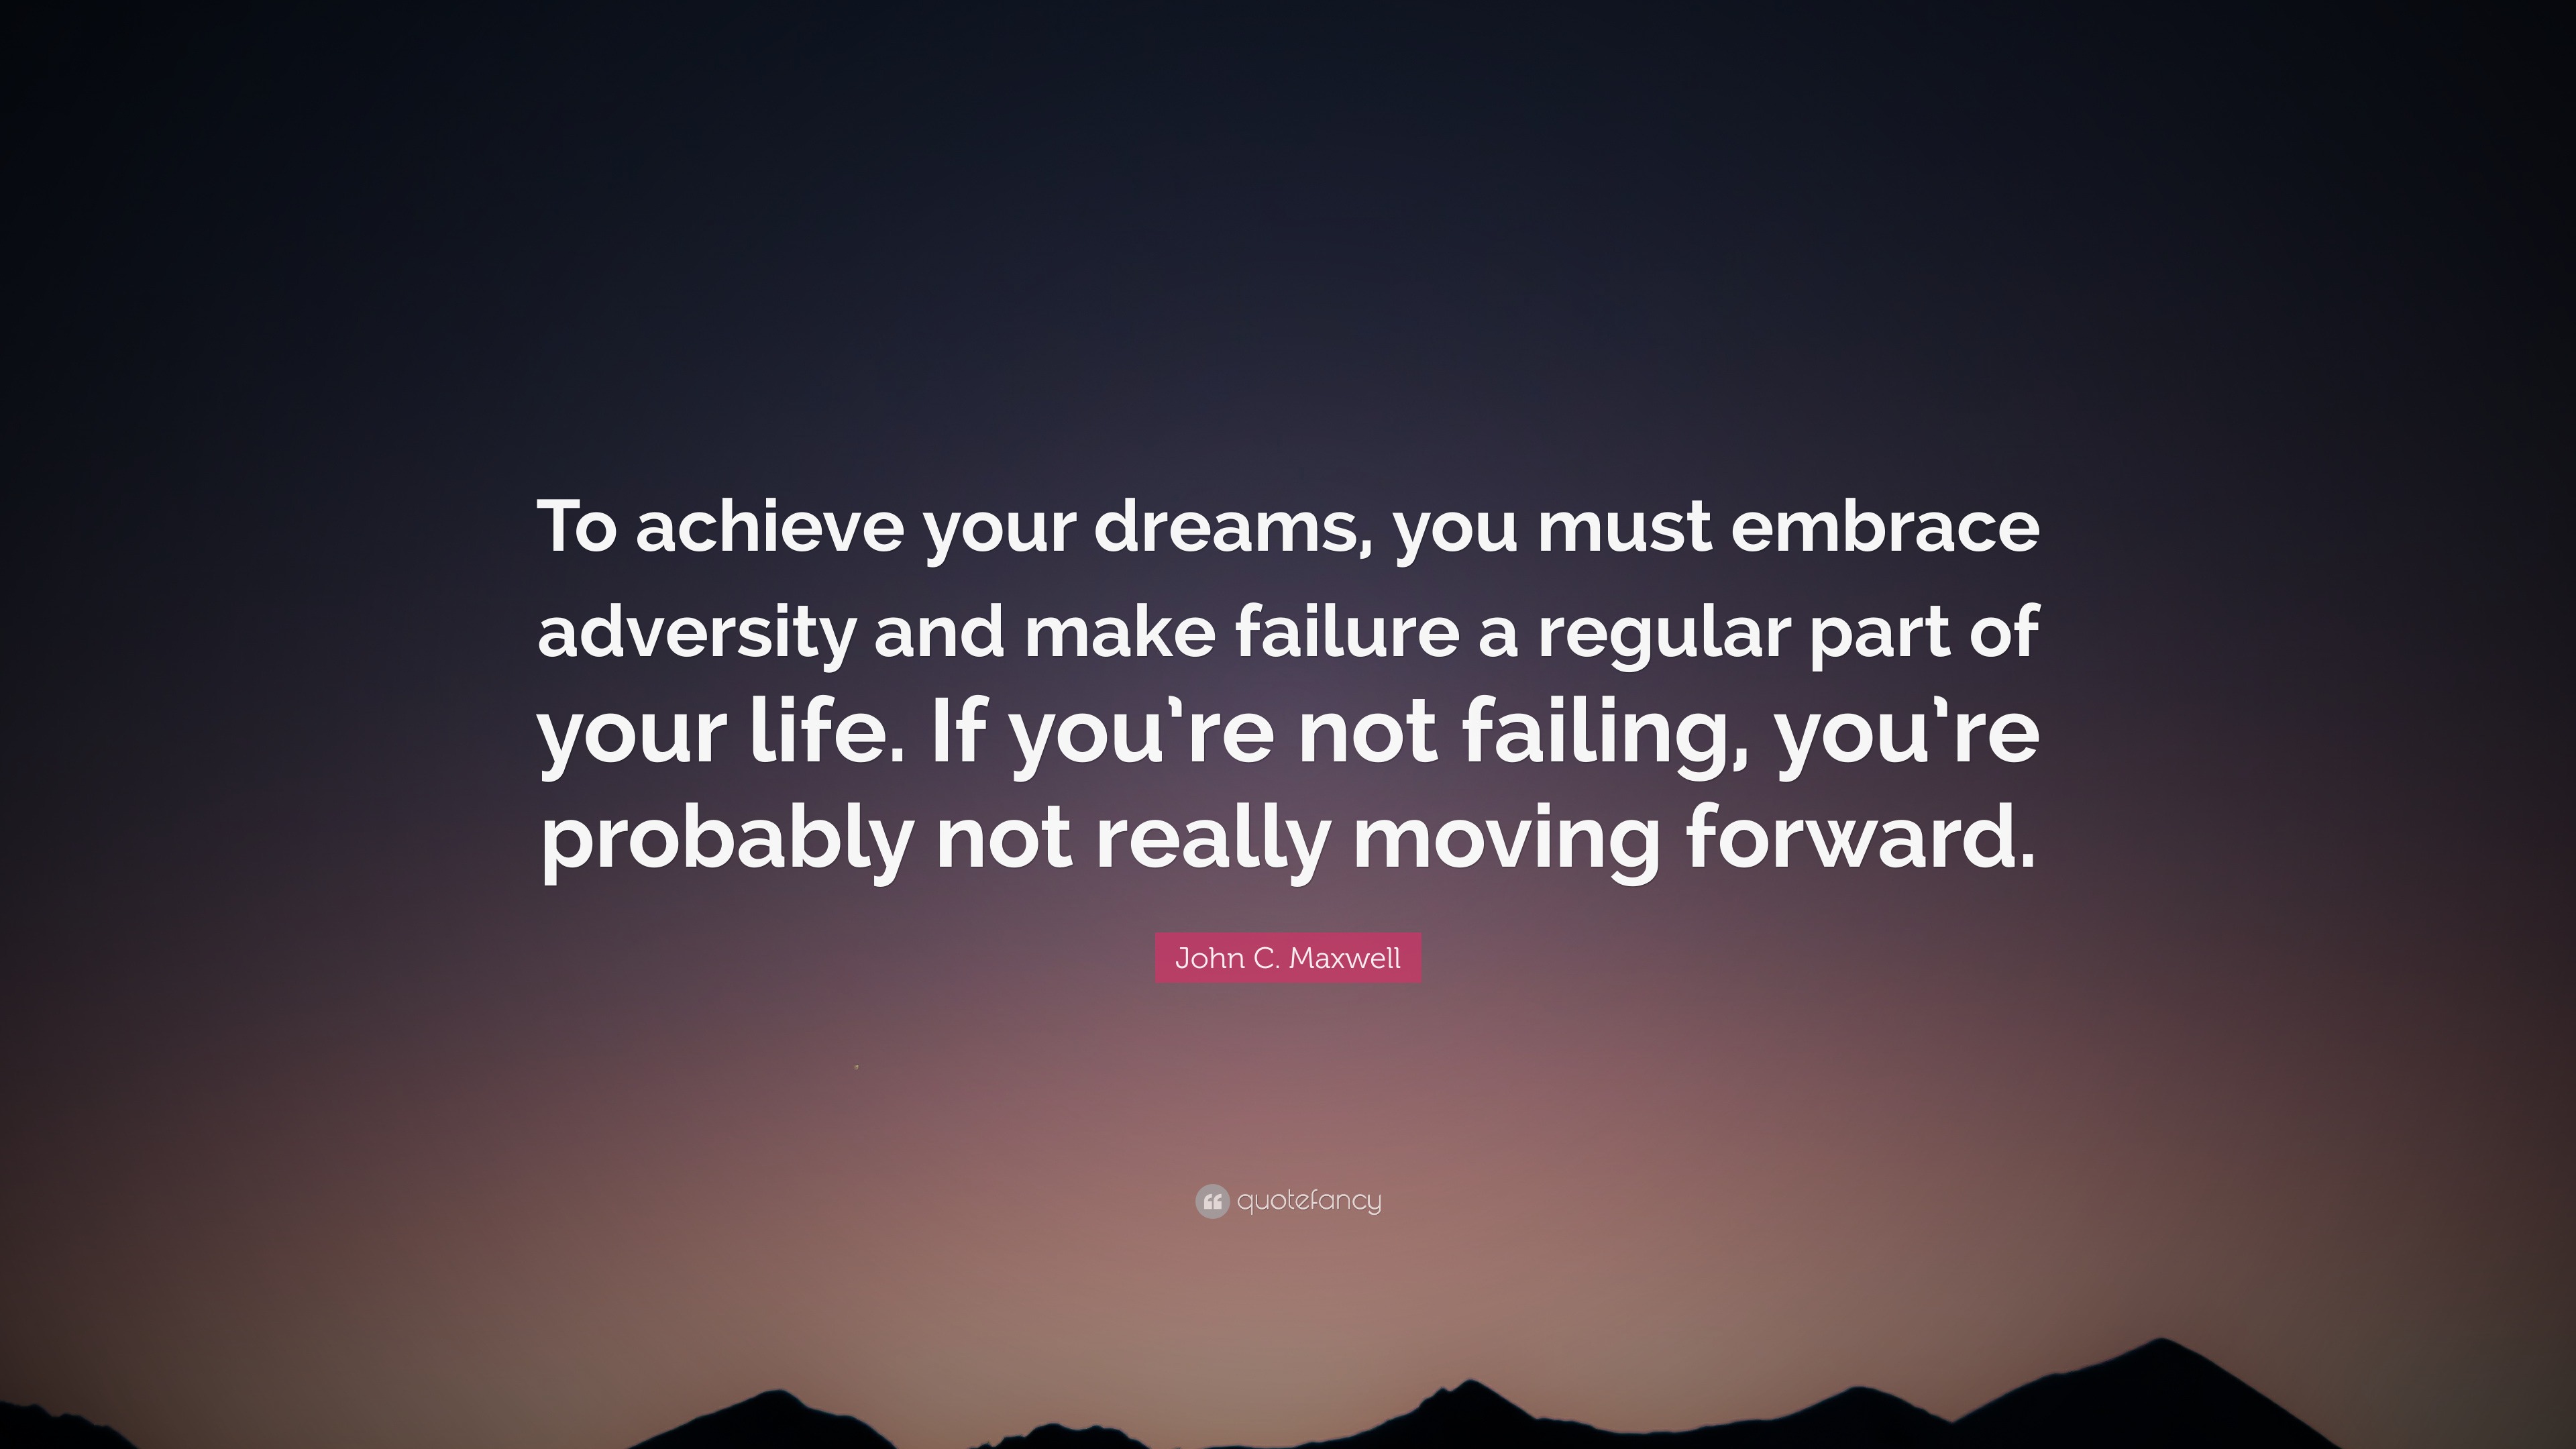 John C. Maxwell Quote: “To achieve your dreams, you must embrace ...